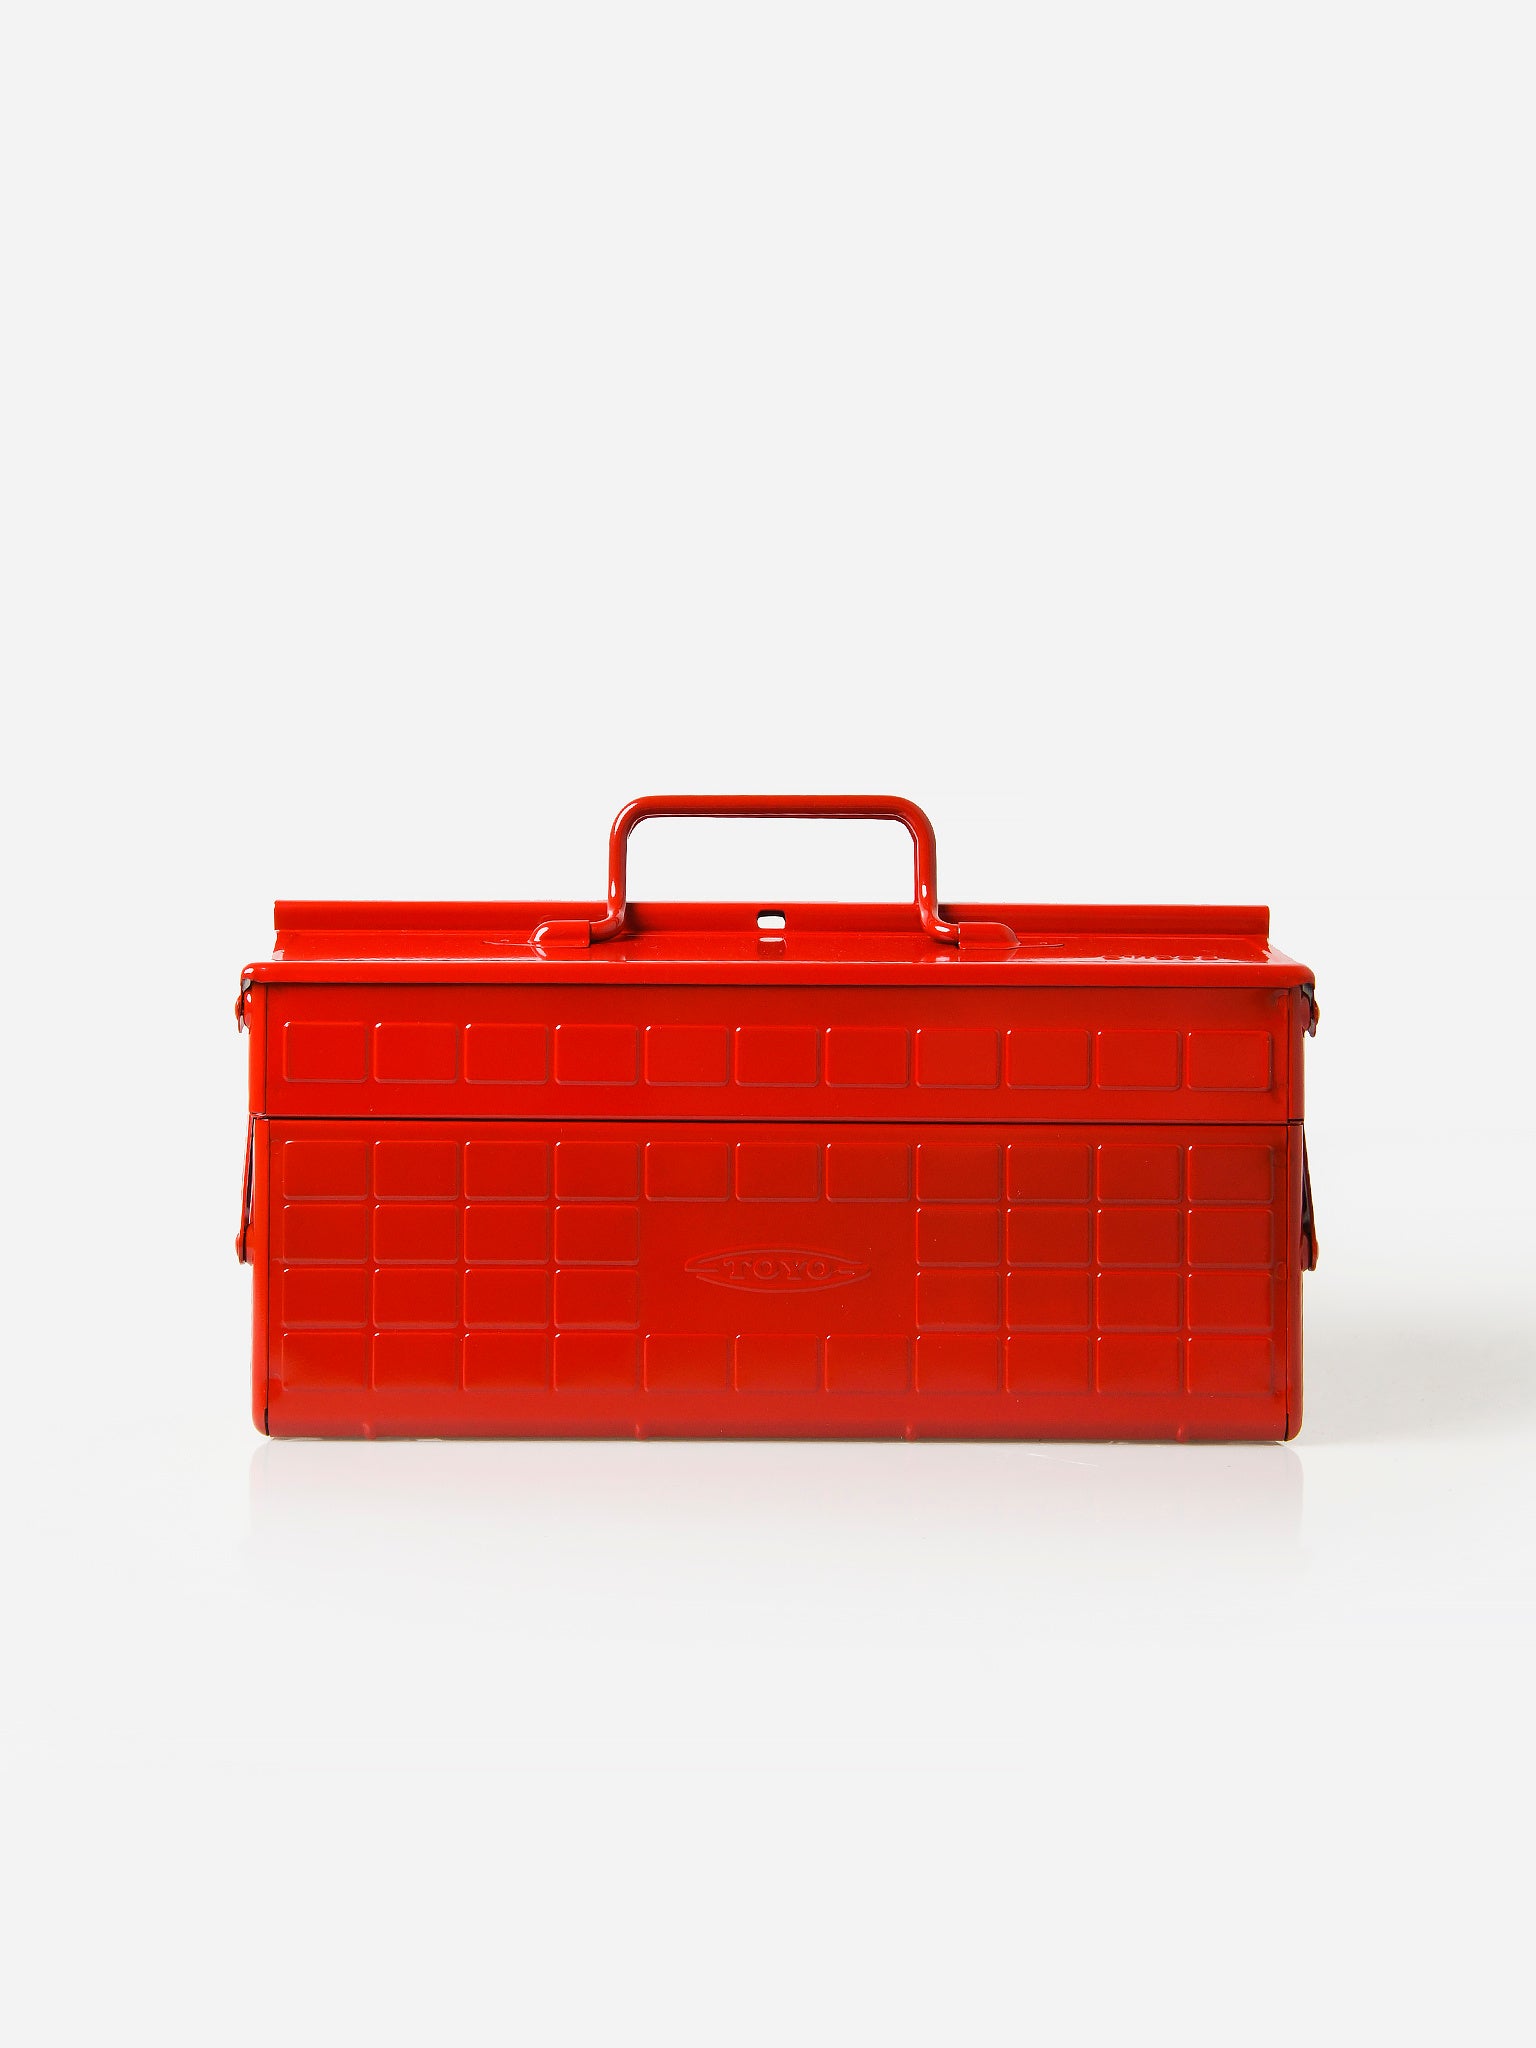 Toyo Steel Cantilever Toolbox ST-350 - Red